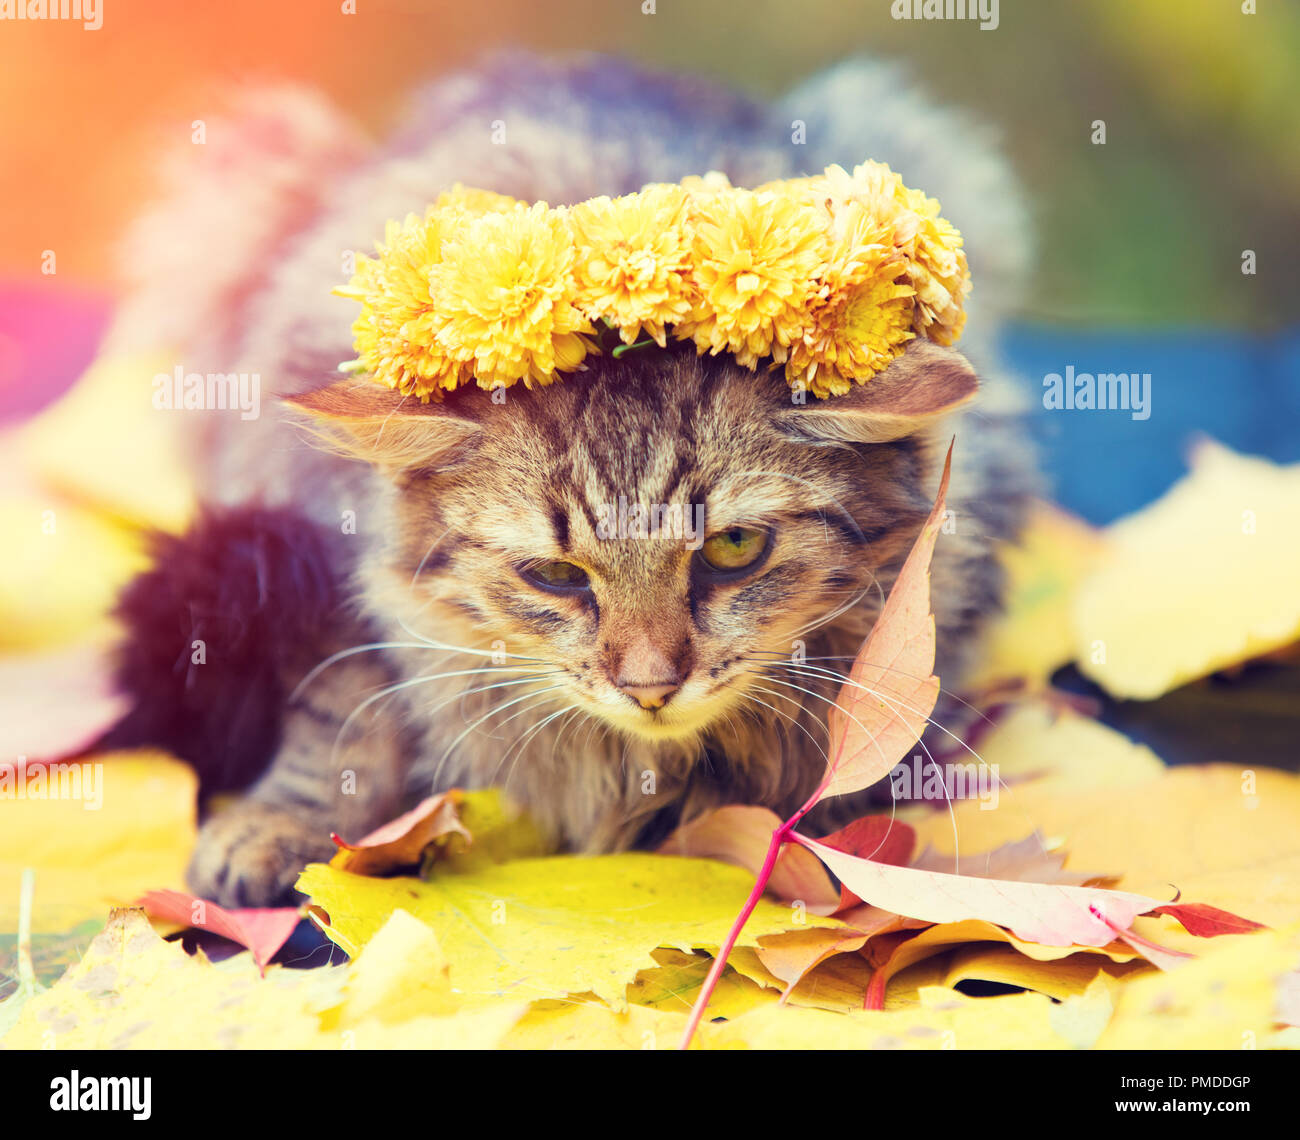 Portrait of a cat lying on the fallen leaves in autumn. Cat crowned flower chaplet Stock Photo